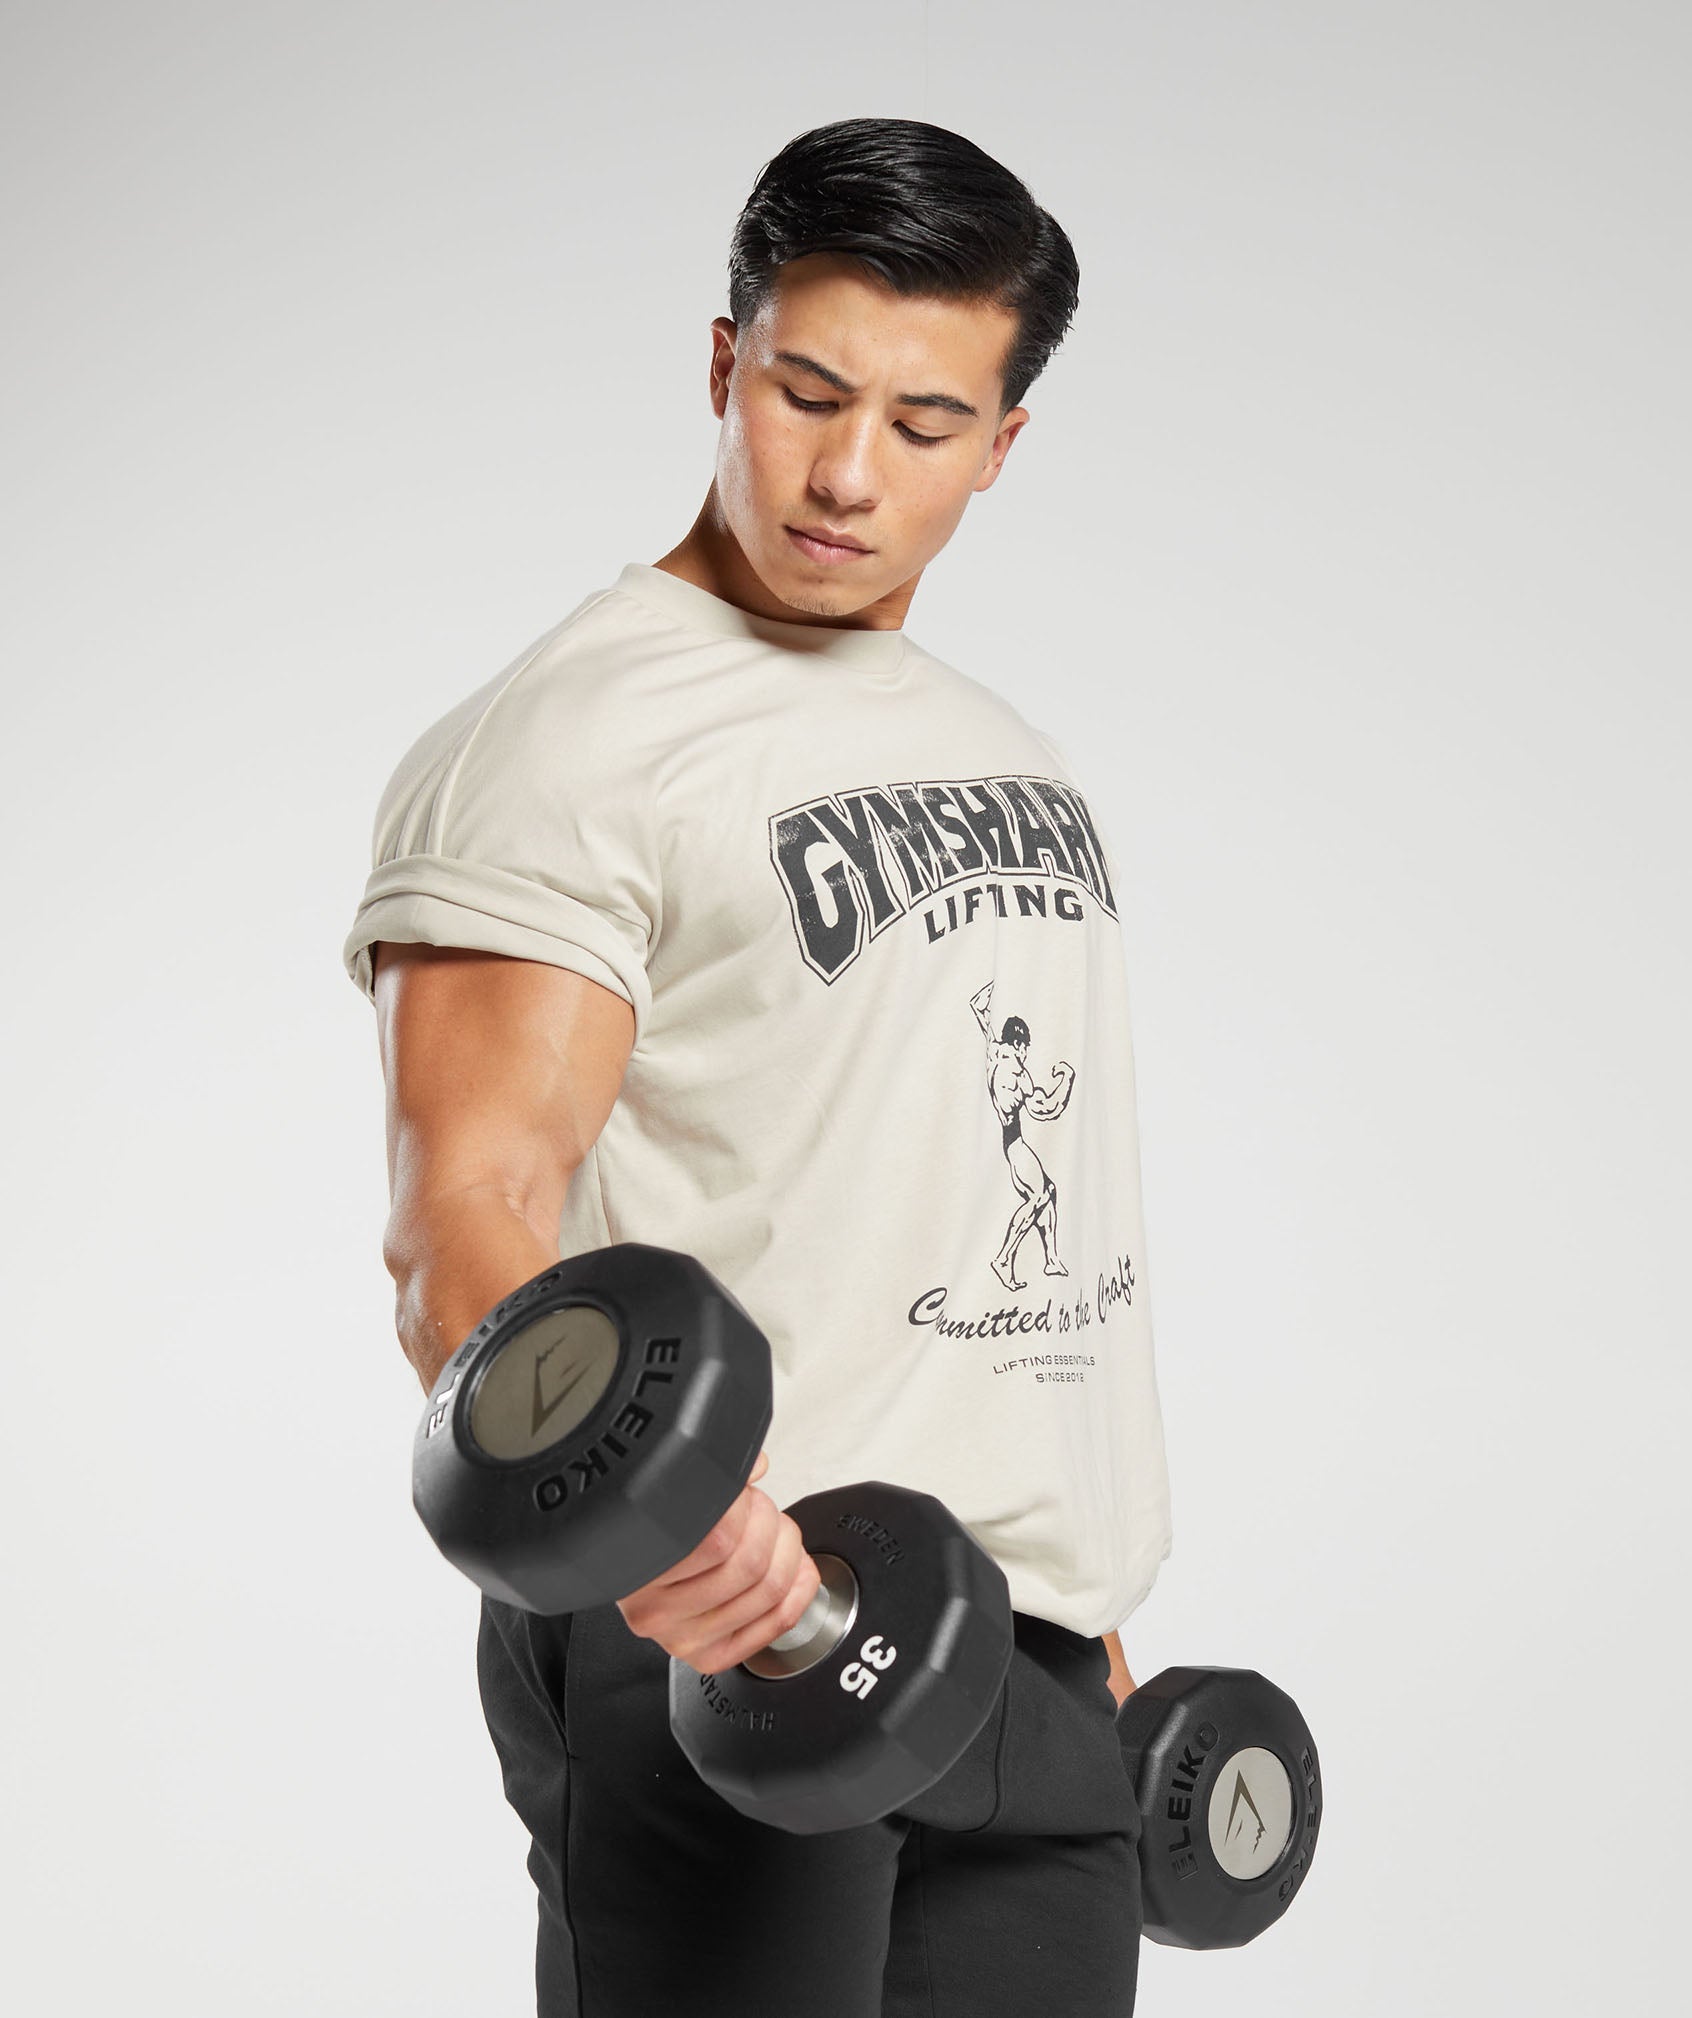 Committed to the Craft T-Shirt in Pebble Grey - view 4